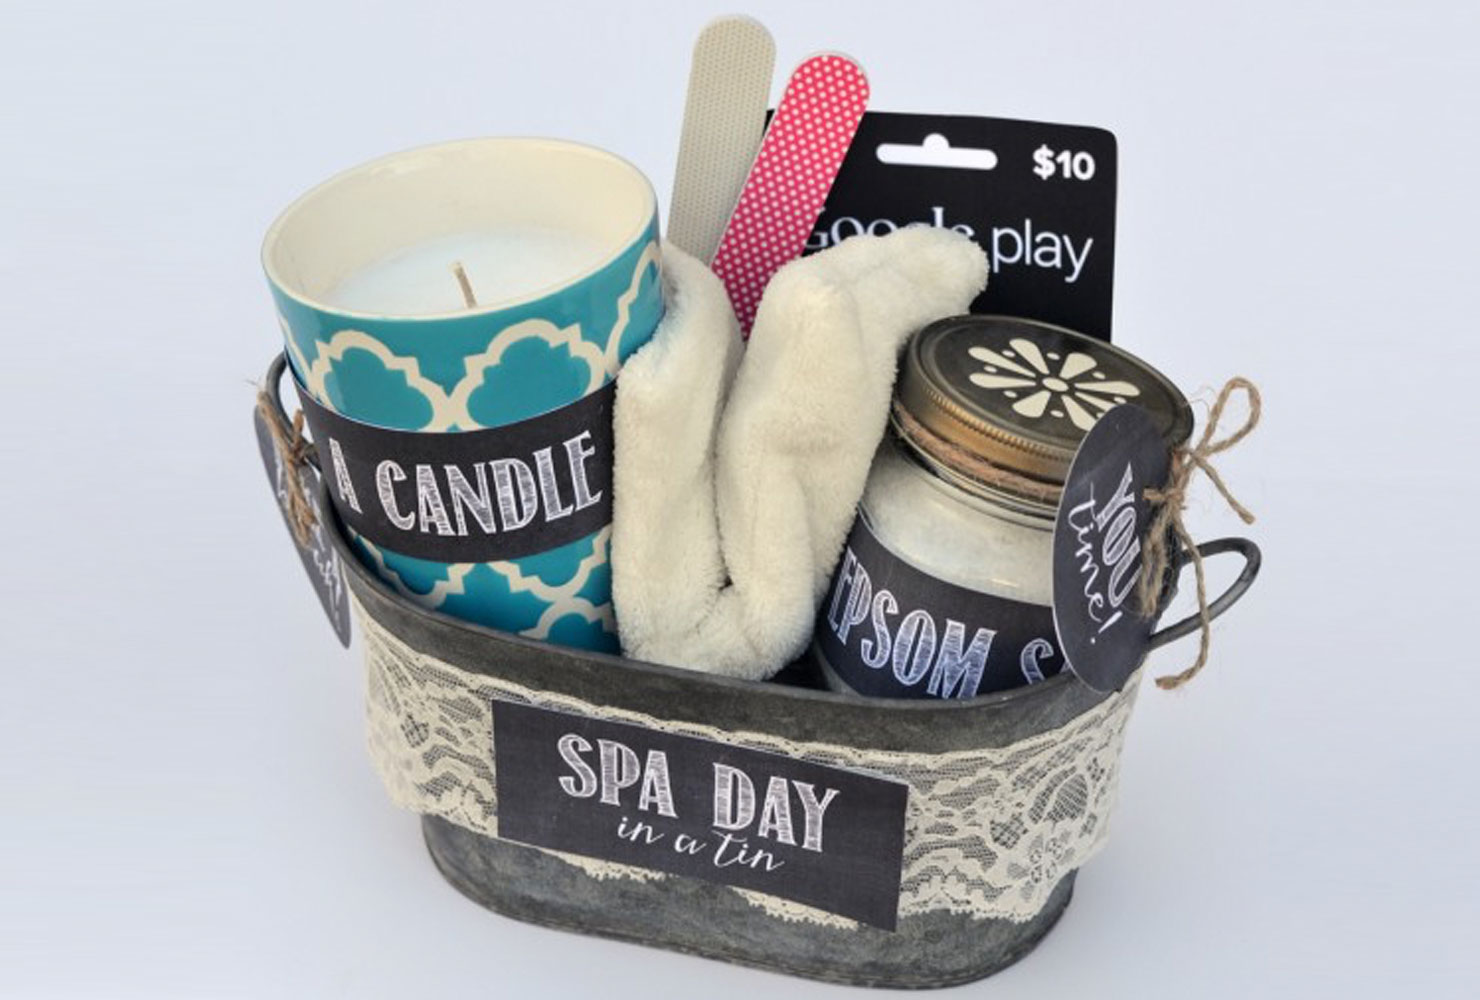 Spa kit with candle, washcloth and epsom salts